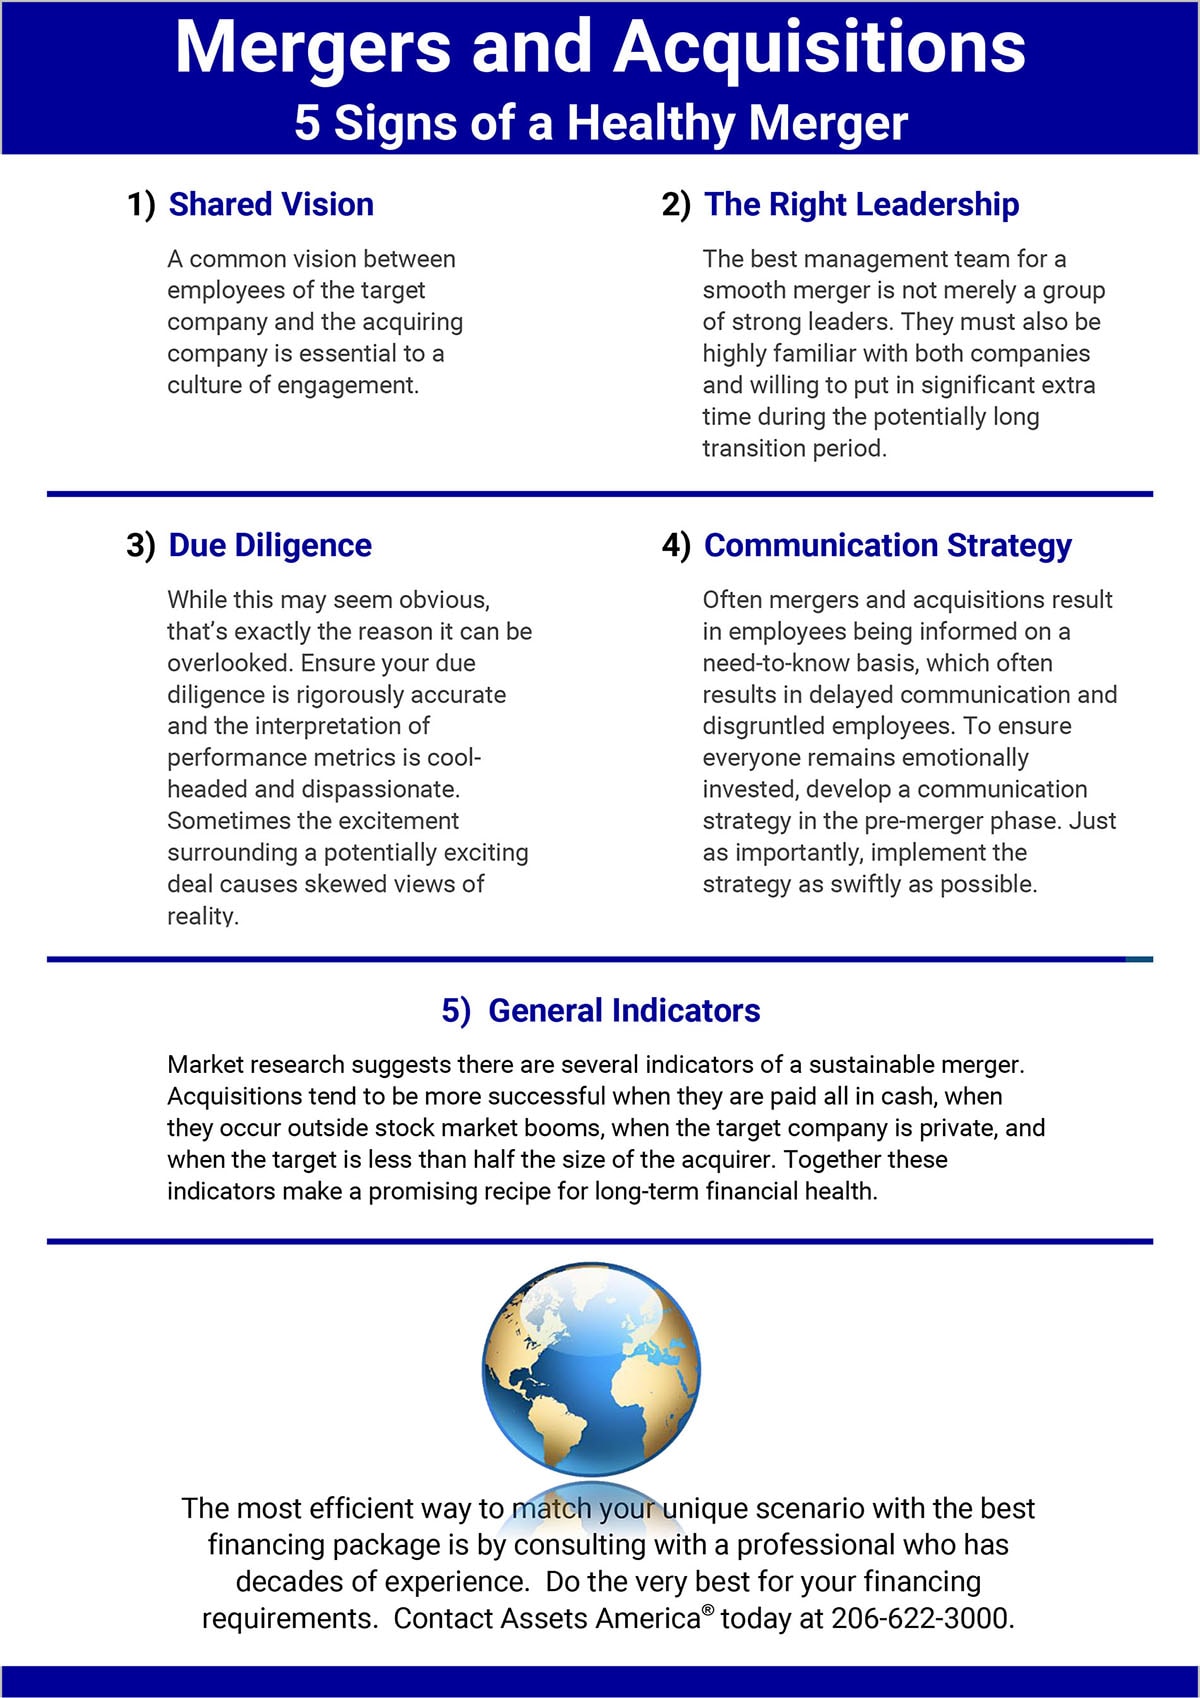 Infographic: 5 Signs of a Healthy Merger